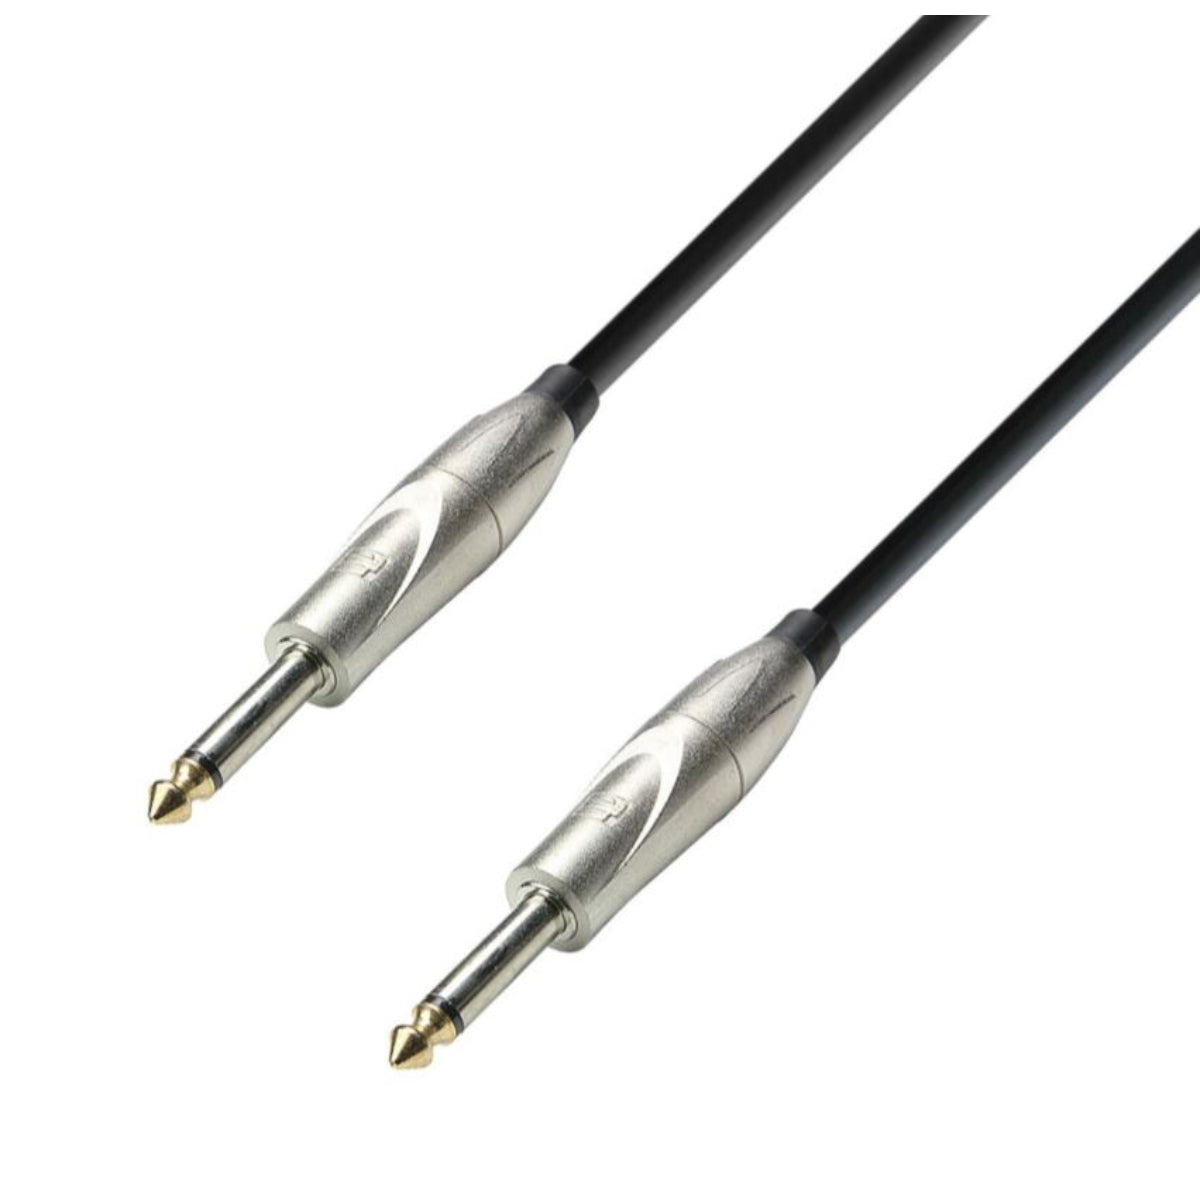 Adam Hall Cables K3IPP0900 - Instrument Cable 6.3 mm Jack mono to 6.3 mm Jack mono 9 m